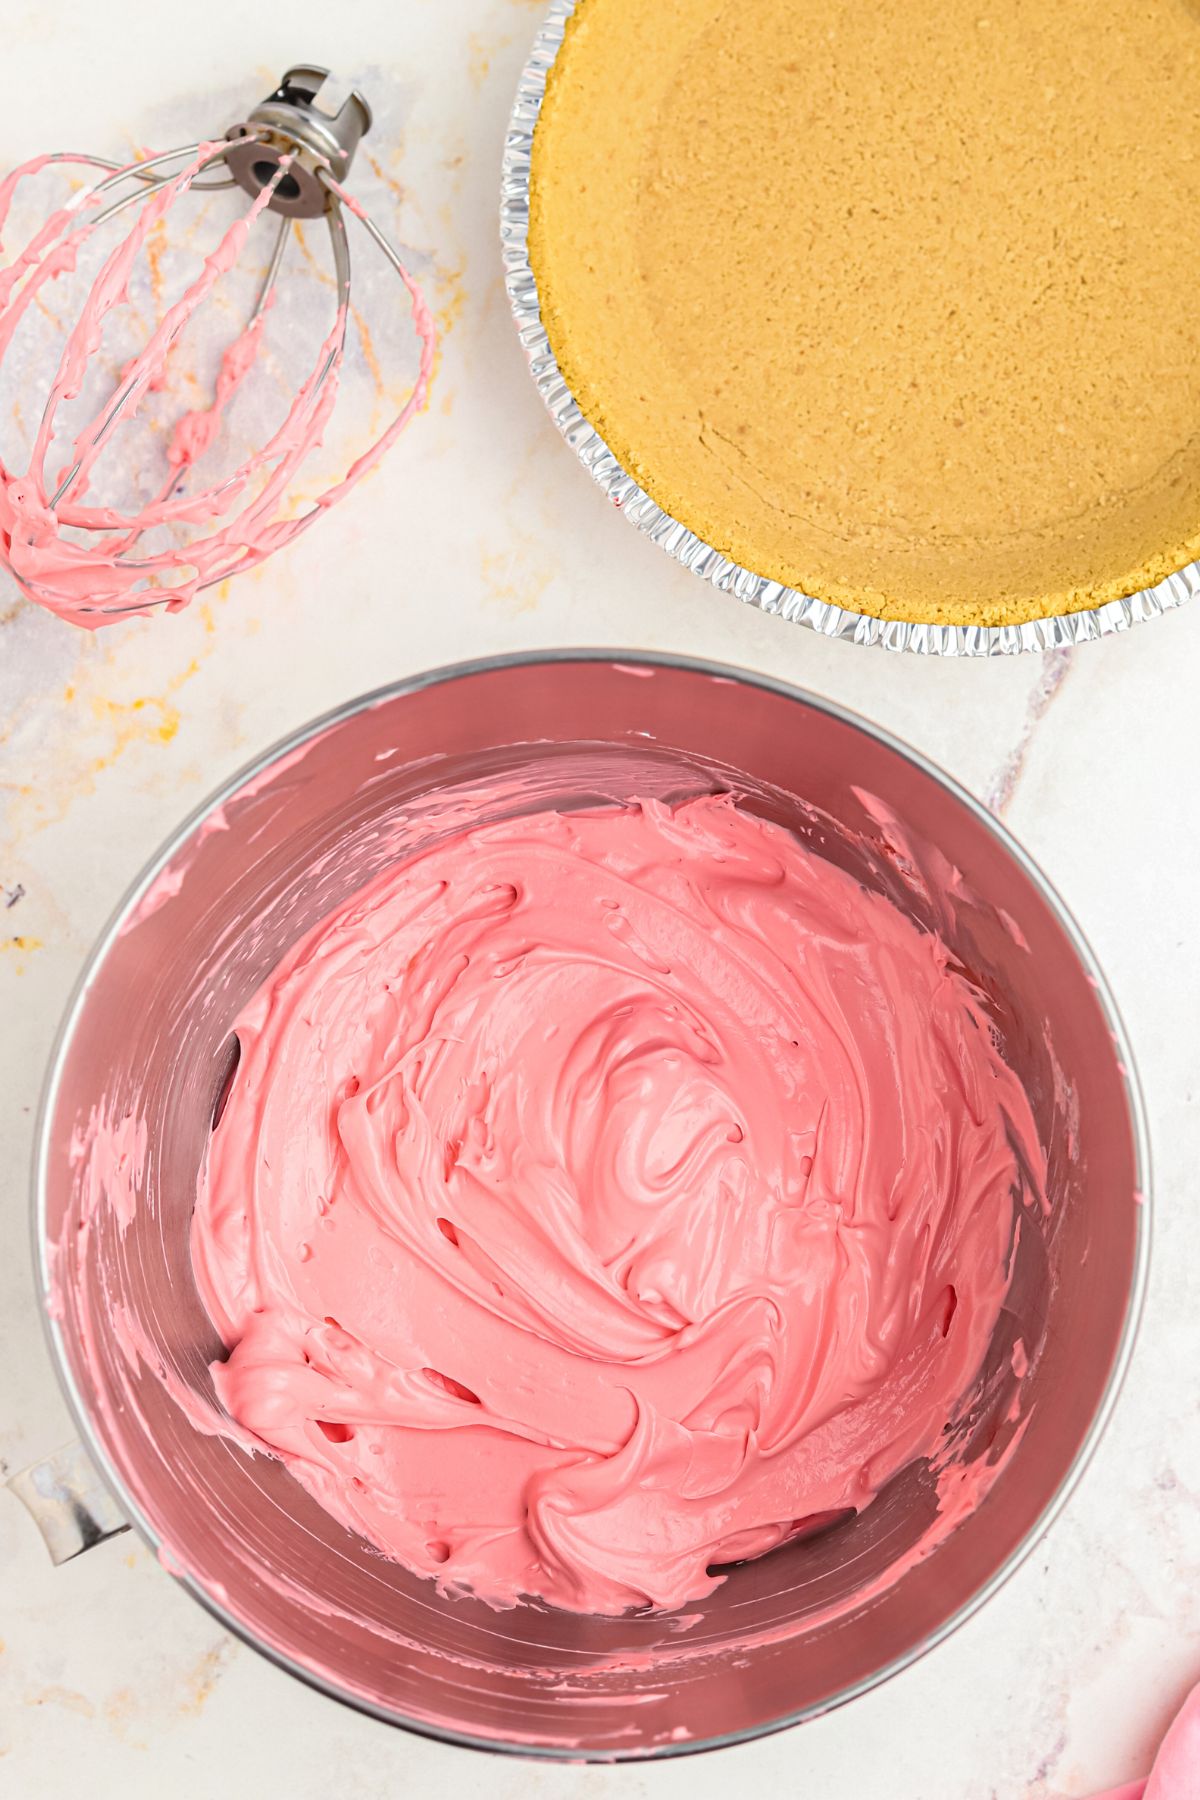 Ingredients mixed in a silver mixing bowl on a white marble table next to a graham cracker crust.